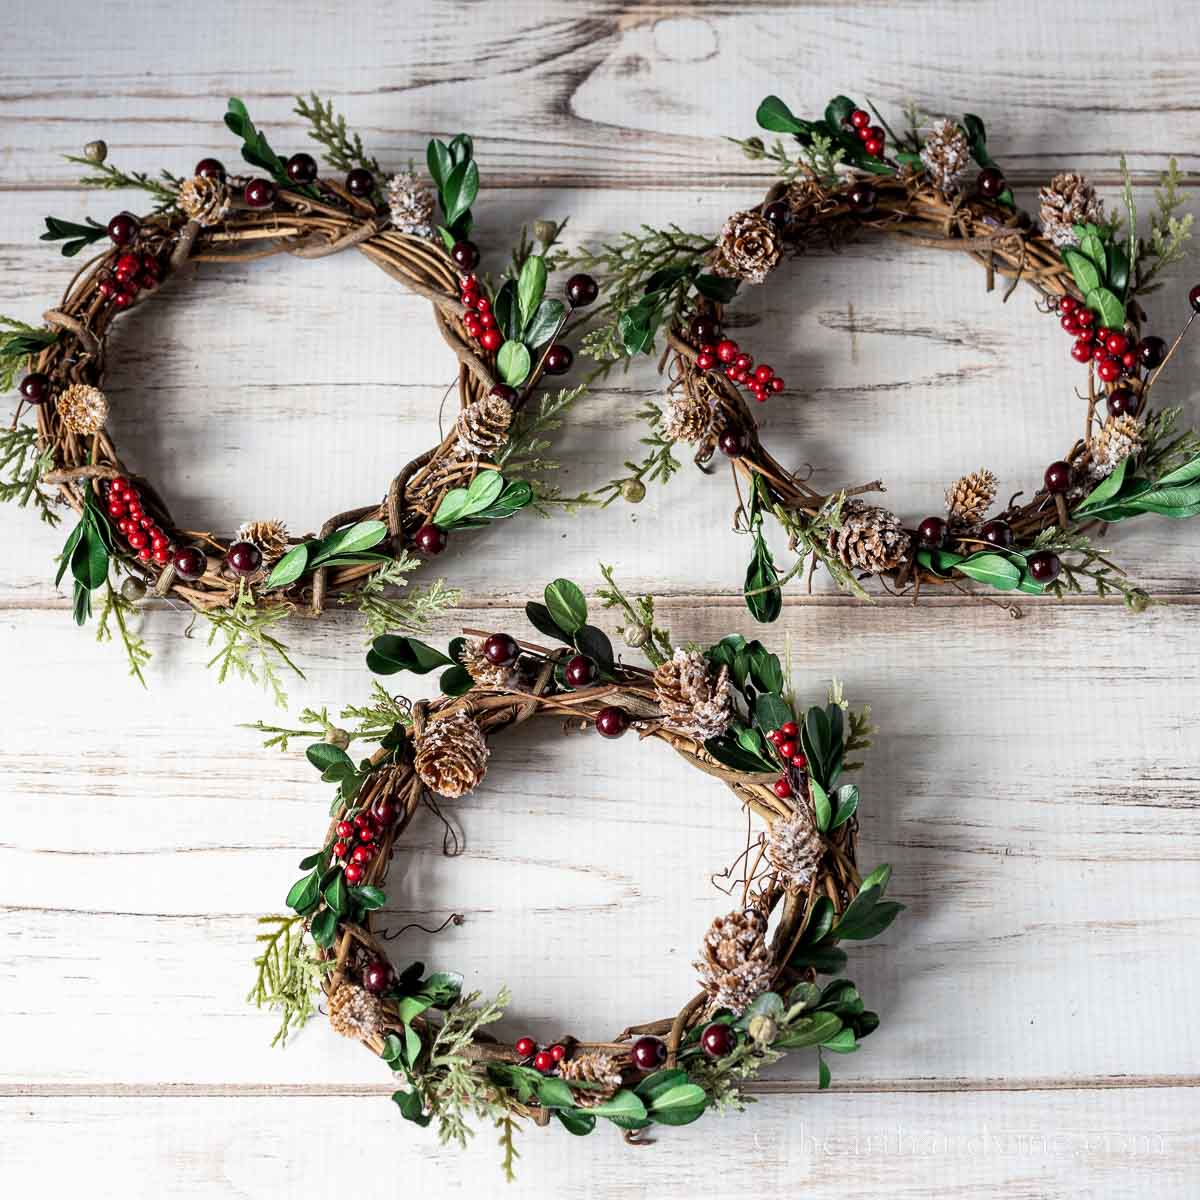 Three candle rings on grapevine bases with faux greenery.